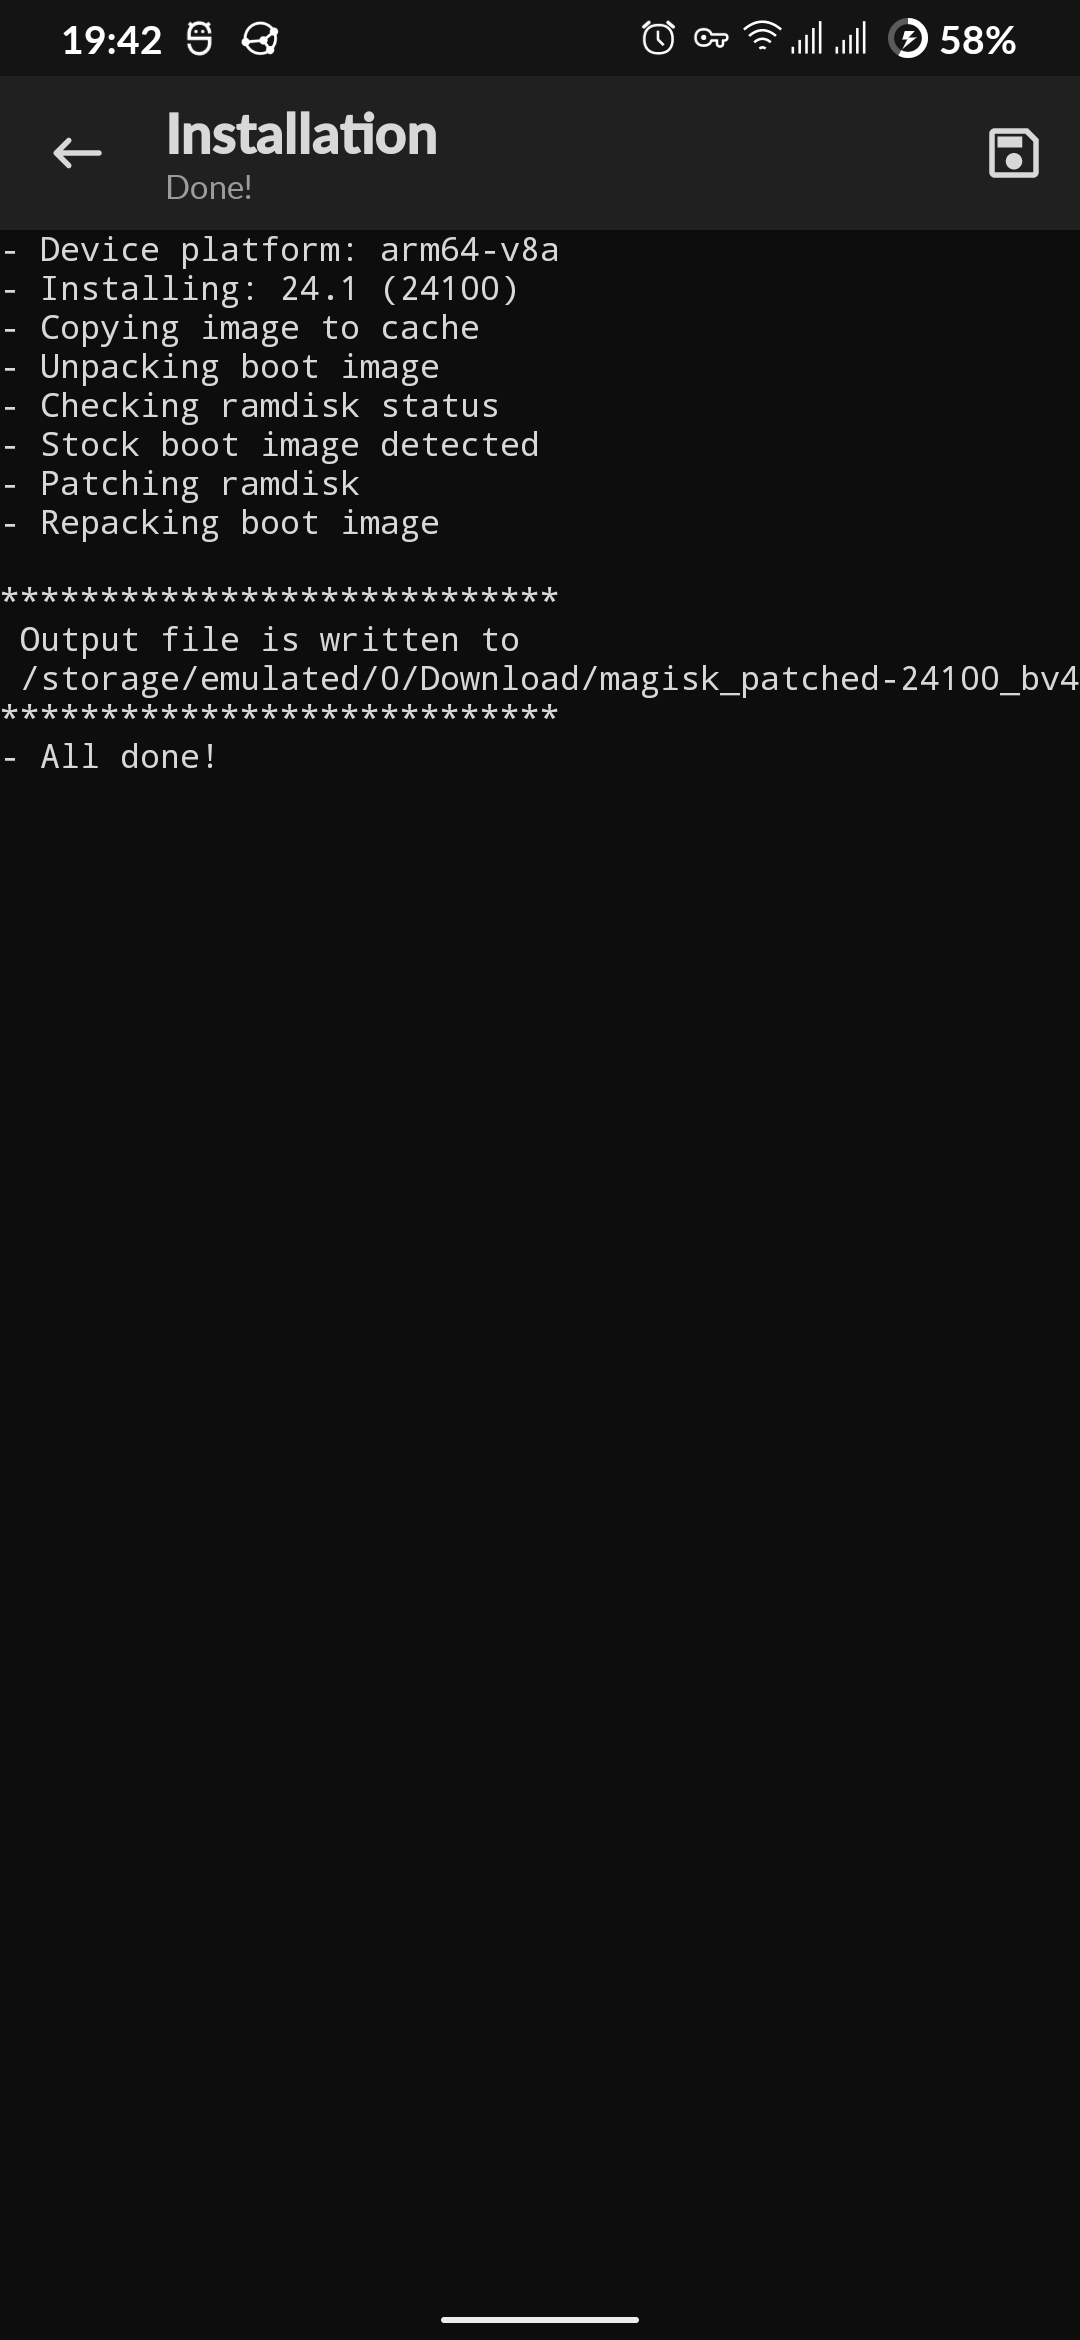 crdroid-twrp-shrp-recovery-magisk-install-app-image-create